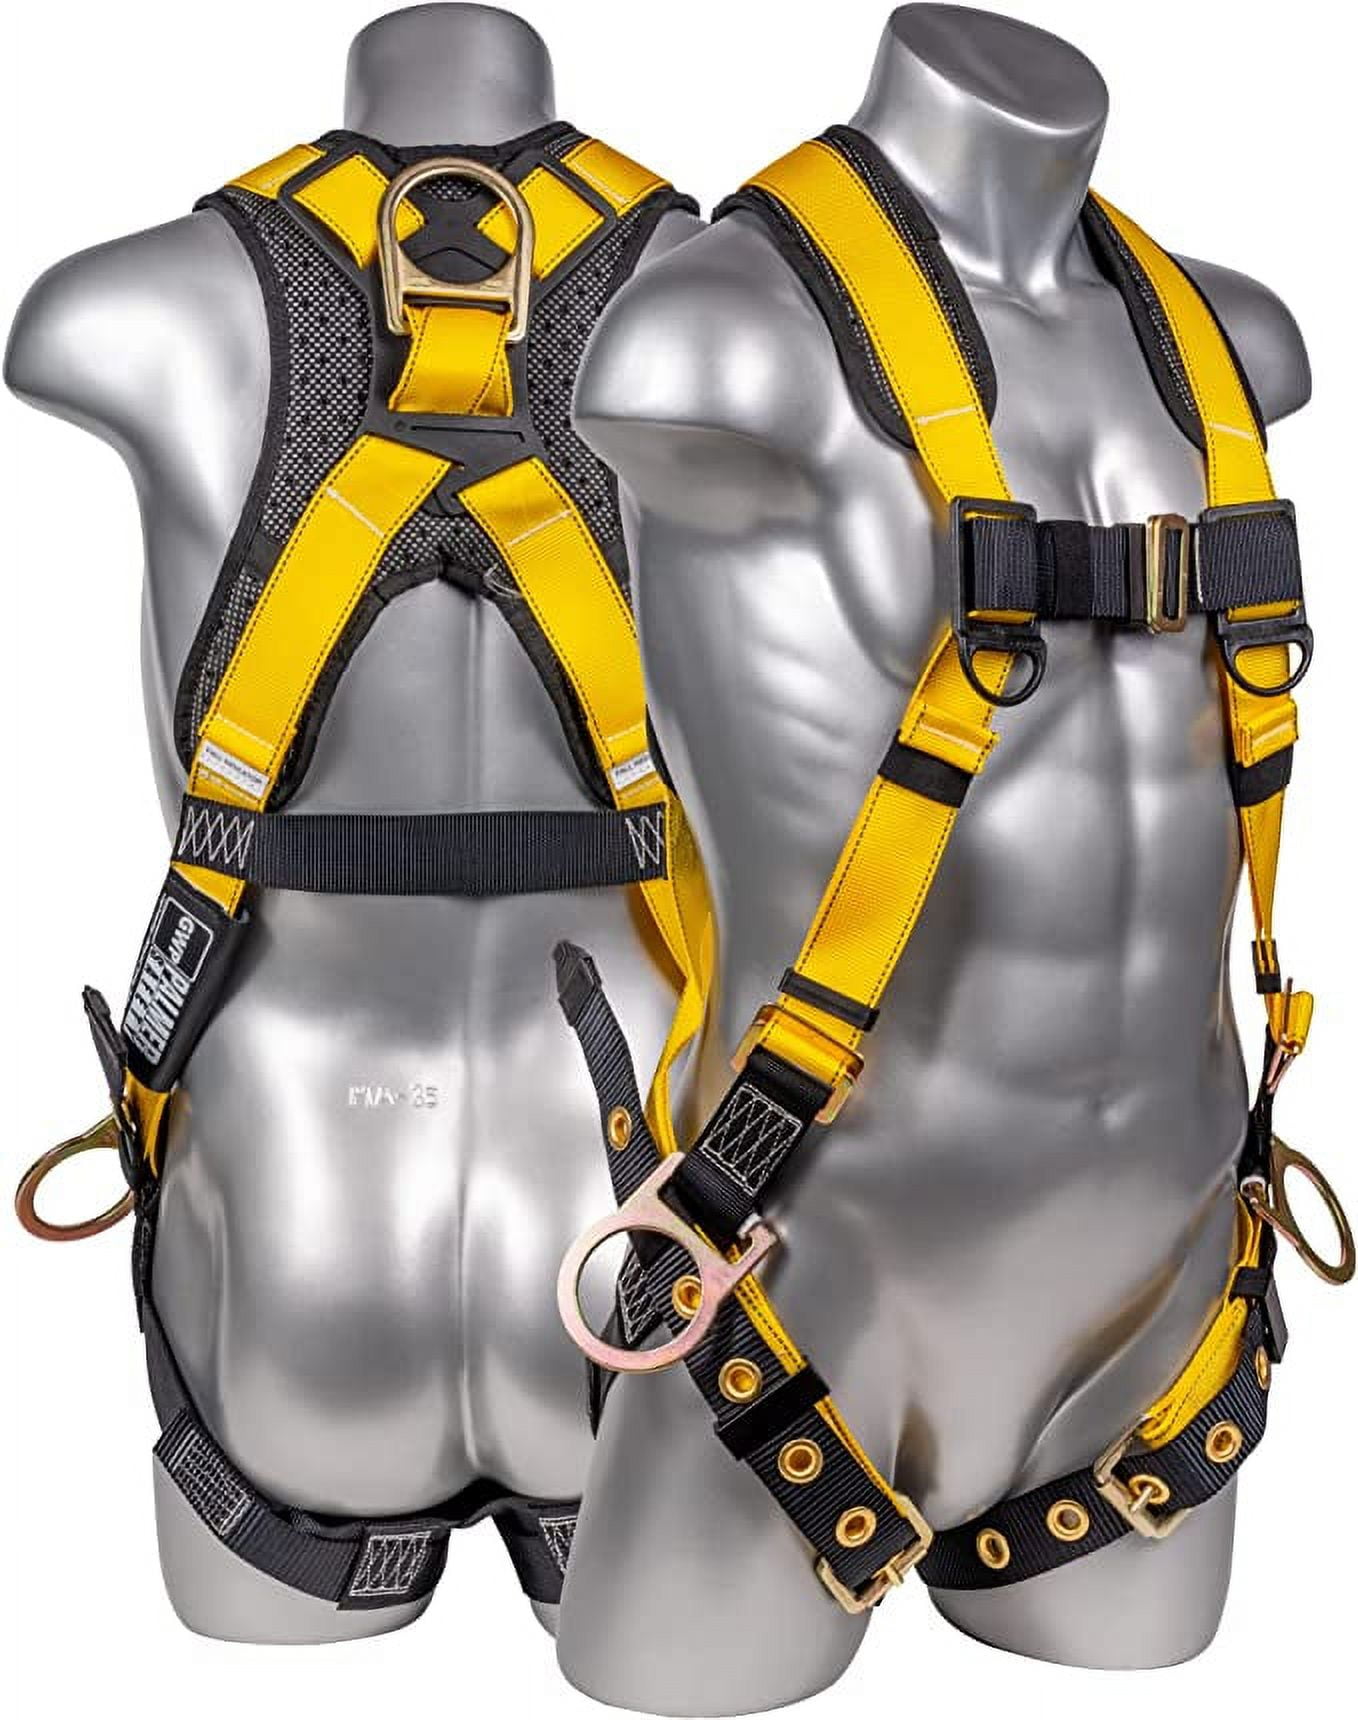 Palmer Safety Full Body Harness with 5 Point Adjustment I 3D Ring